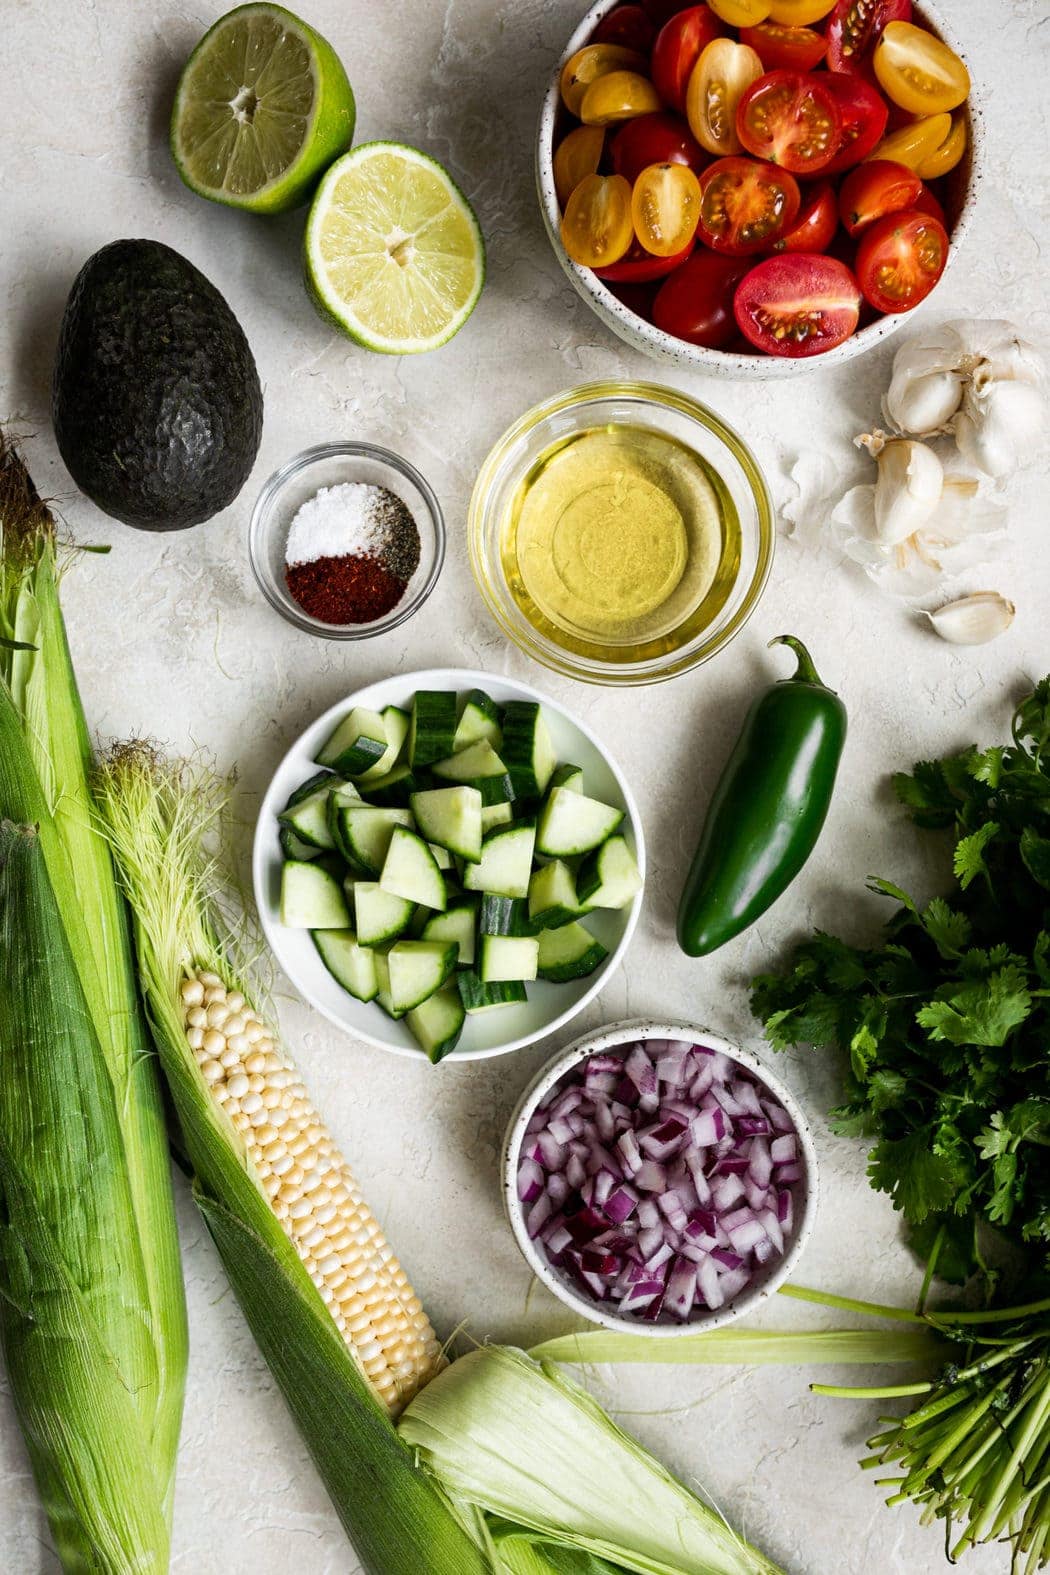 All ingredients for summer corn salad on a counter